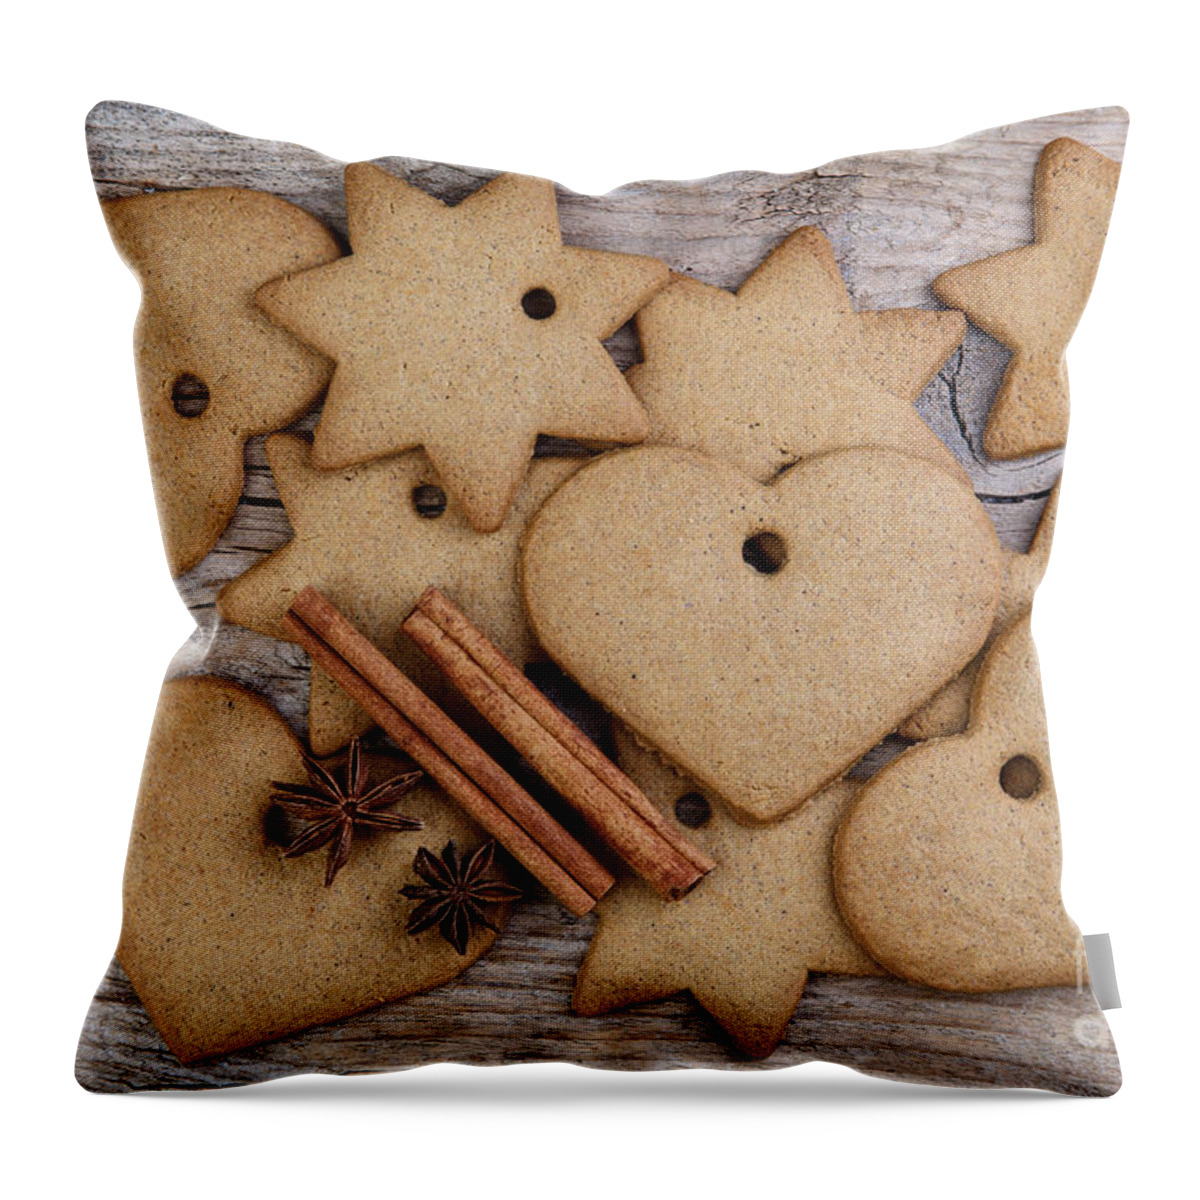 Ginger Throw Pillow featuring the photograph Gingerbread by Nailia Schwarz